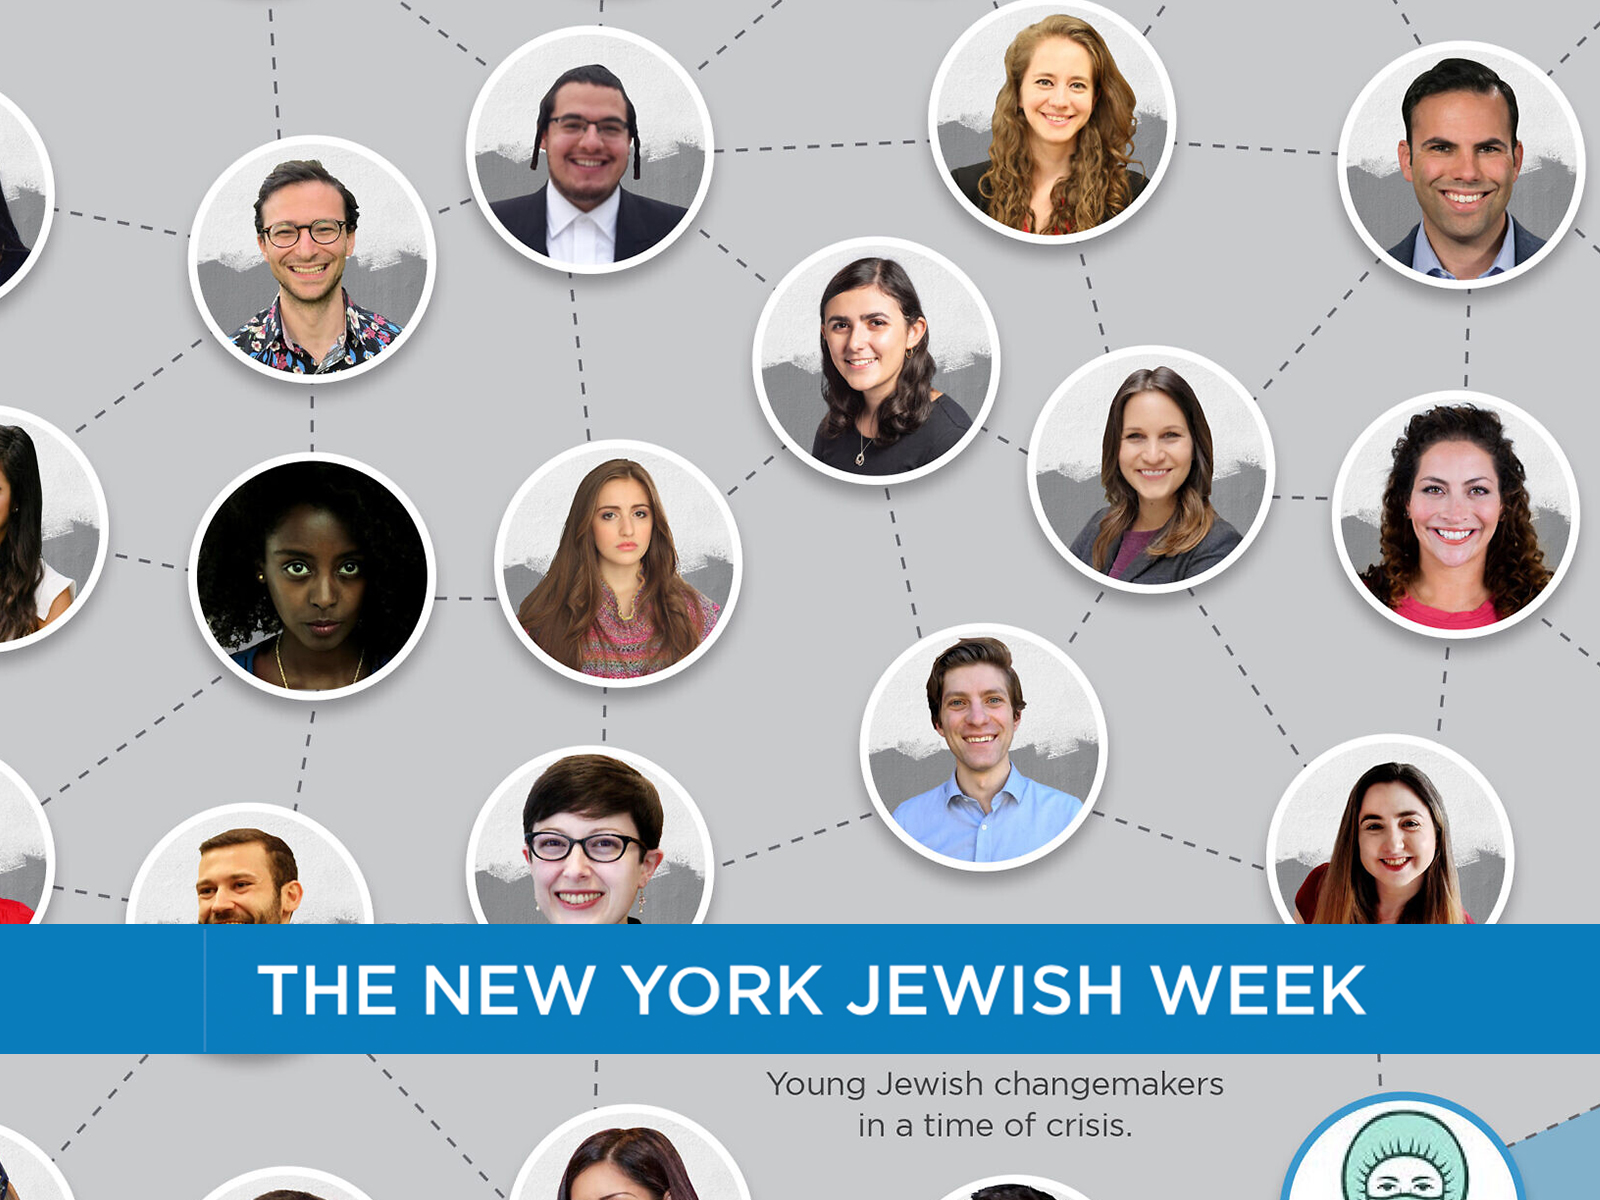 New York Jewish Week logo overlaid on photo collage of young adults